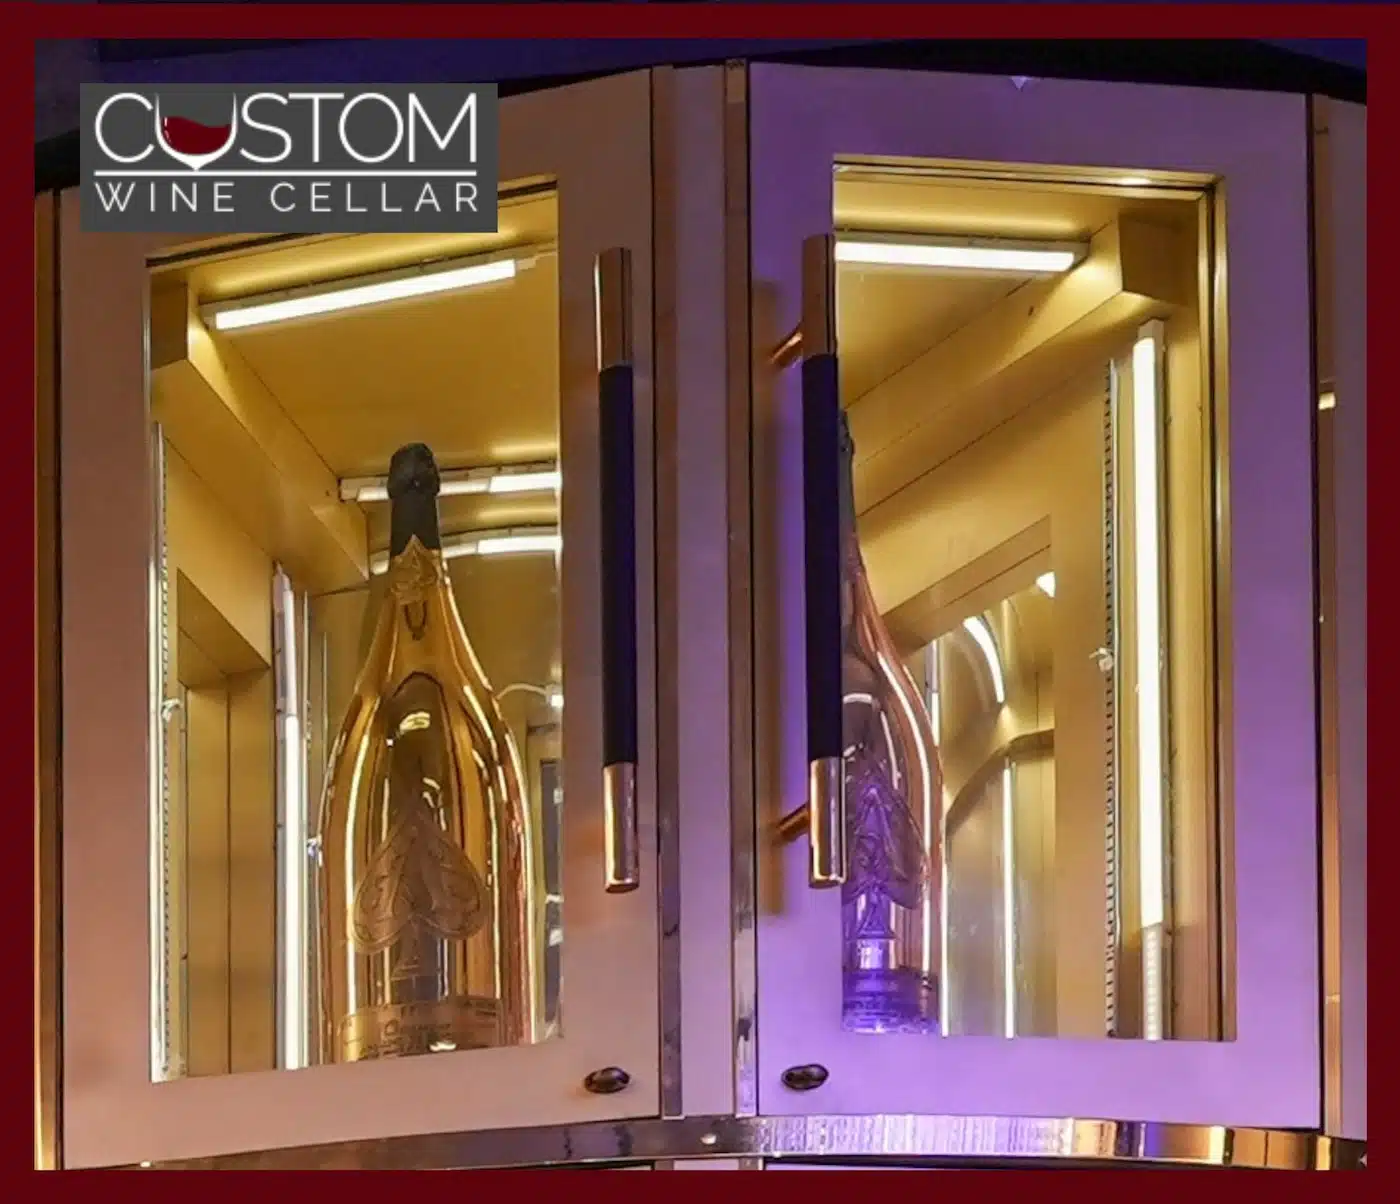 A photo of a luxury restaurant wine cellar cabinet design that could fit larger-than-magnum bottles